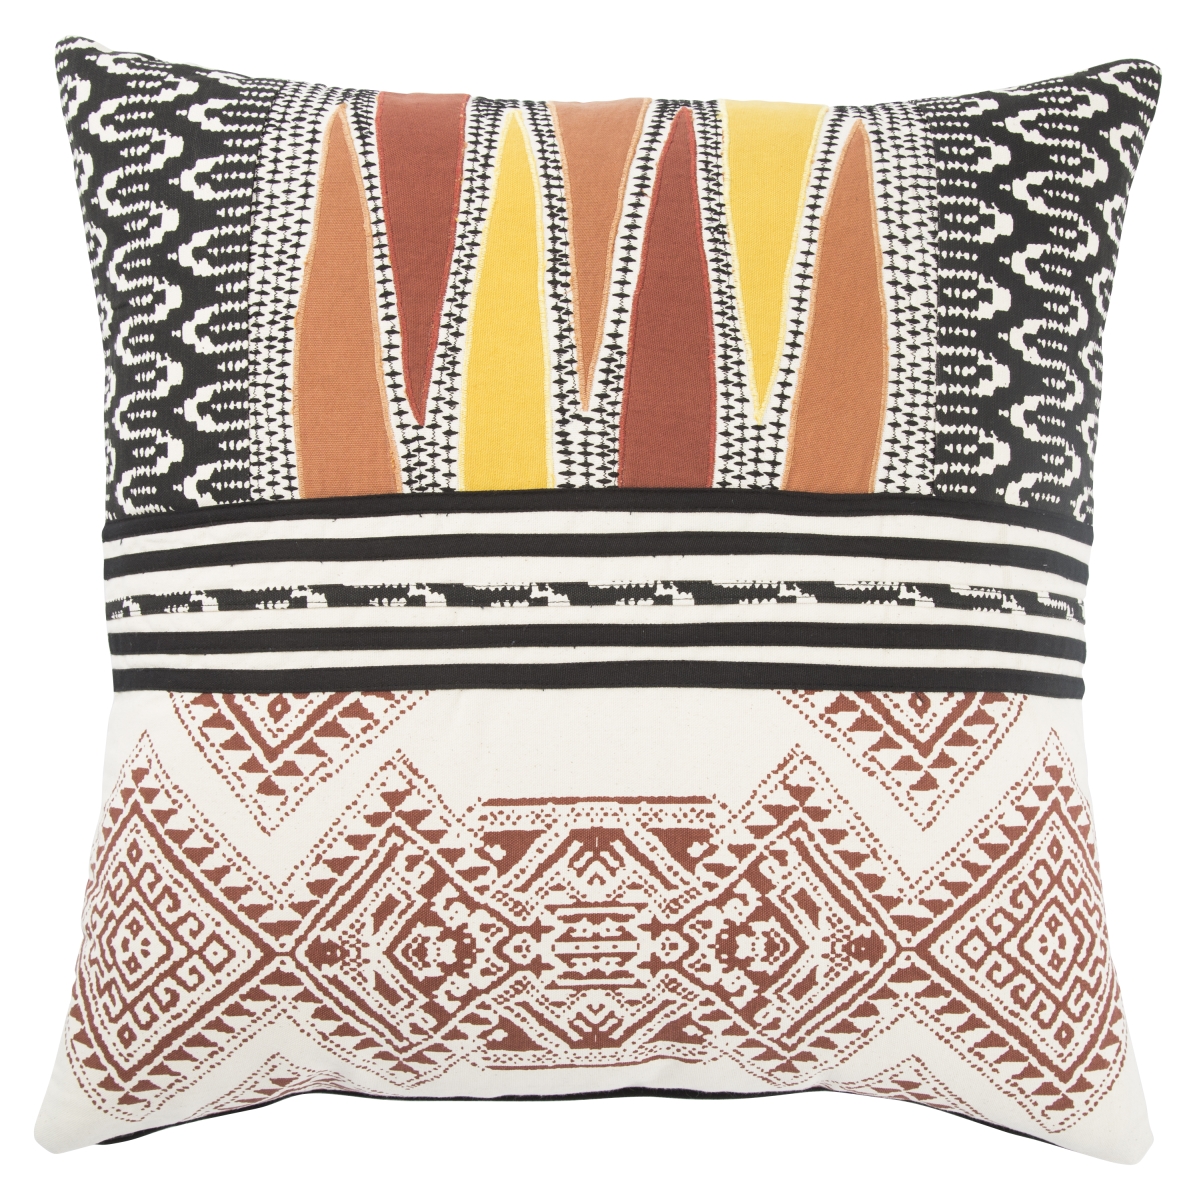 Plw102386 22 X 22 In. Traditions Made Modern Pillows Museum Ifa Mesa Orange & Black Geometric Poly Throw Pillow